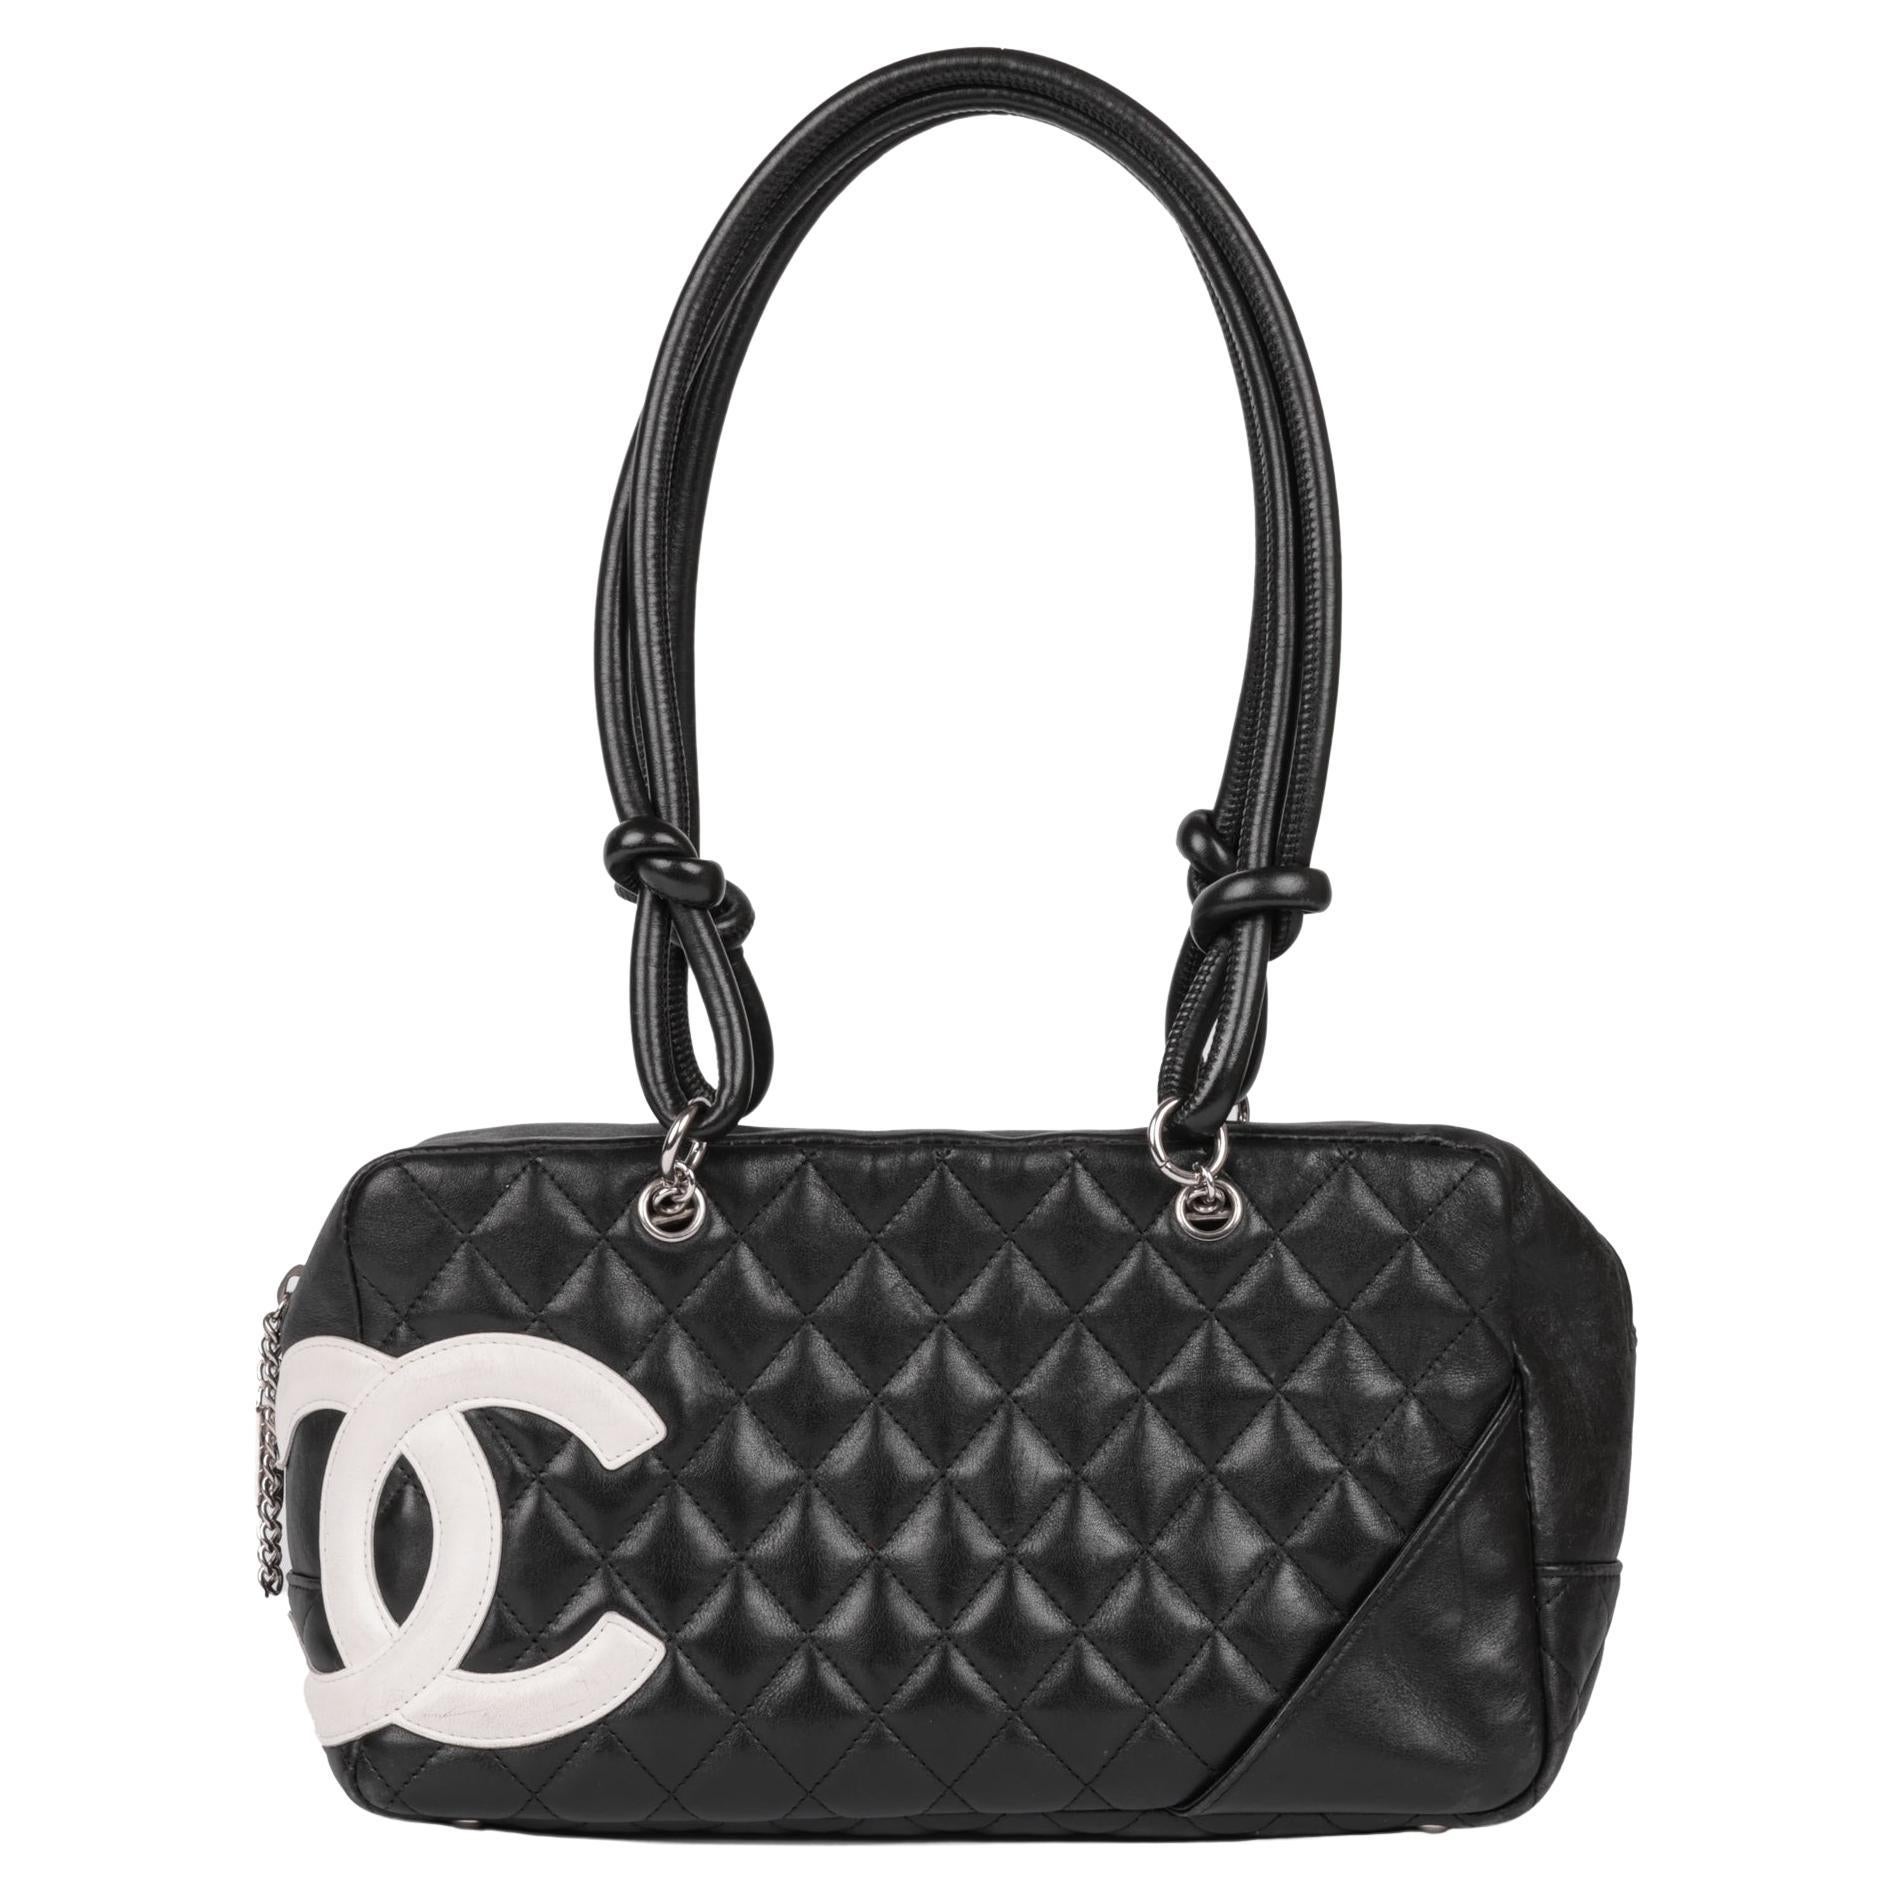 CHANEL Black and White Quilted Lambskin Large Cambon Bowling Bag